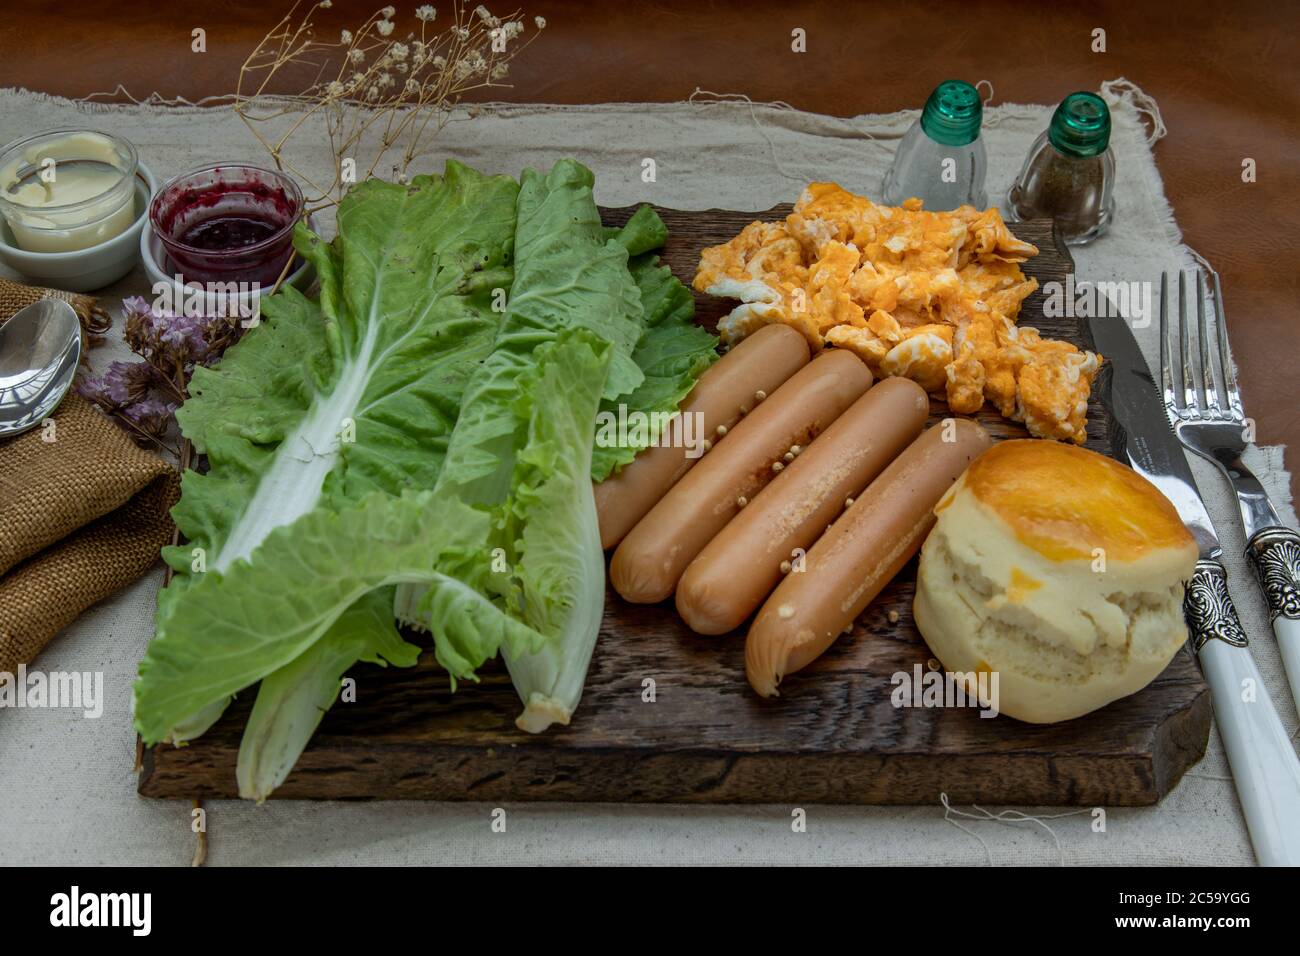 Continental breakfast with scrambled eggs, fried sausages, vegetable and scones on Wooden background, Selective focuse. Stock Photo